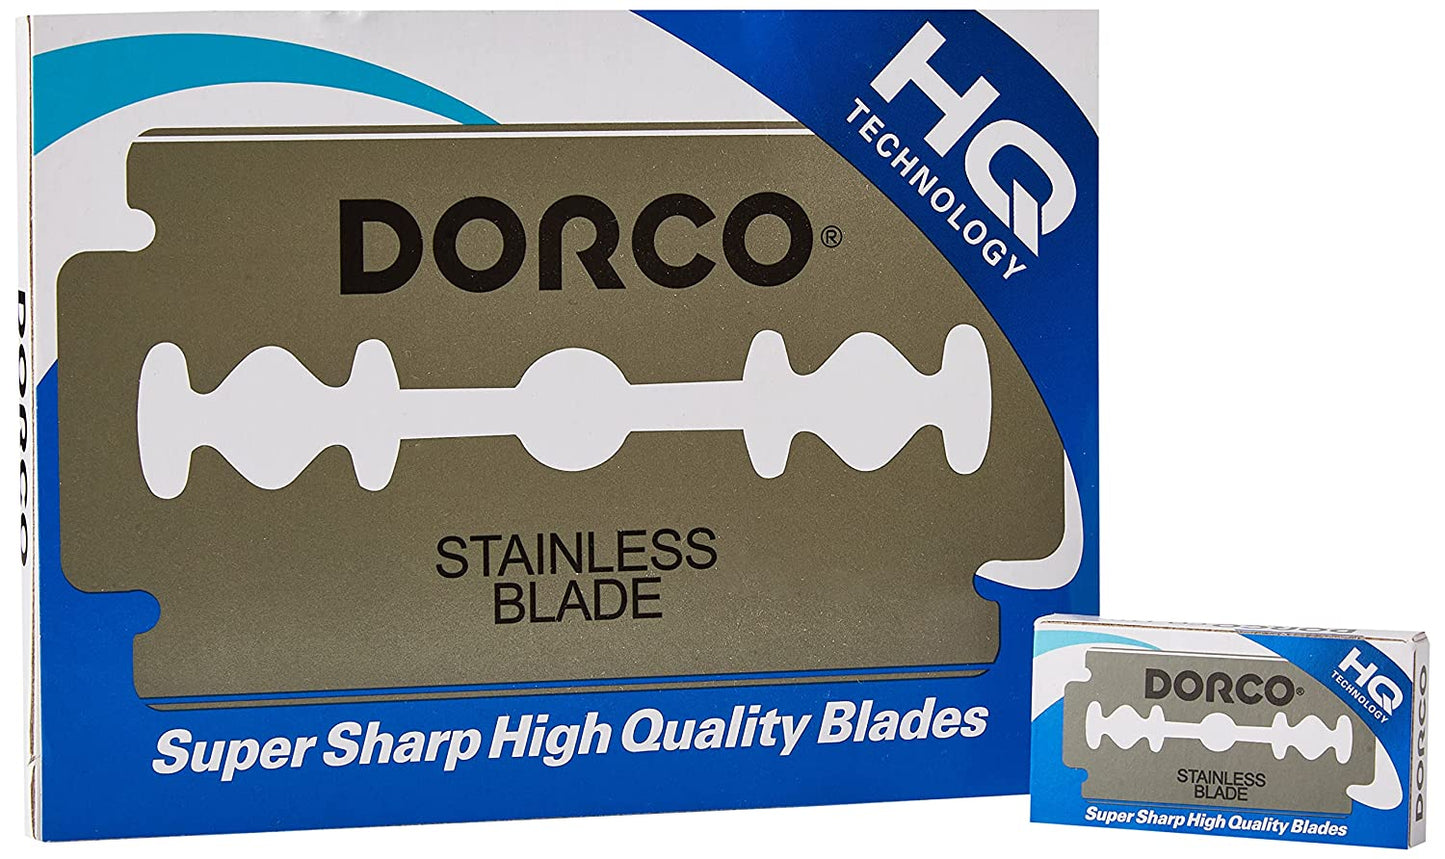 Dorco Stainless Steel Blade ST300 - 100ct